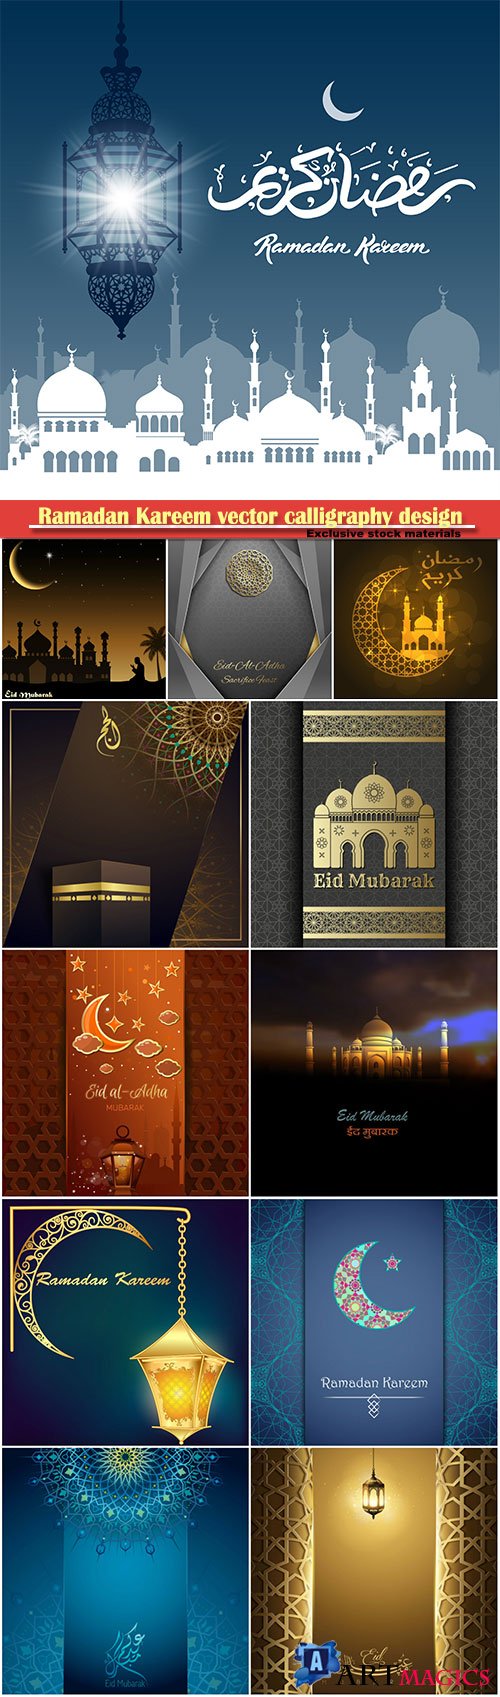 Ramadan Kareem vector calligraphy design with decorative floral pattern, mosque silhouette, crescent and glittering islamic background # 23